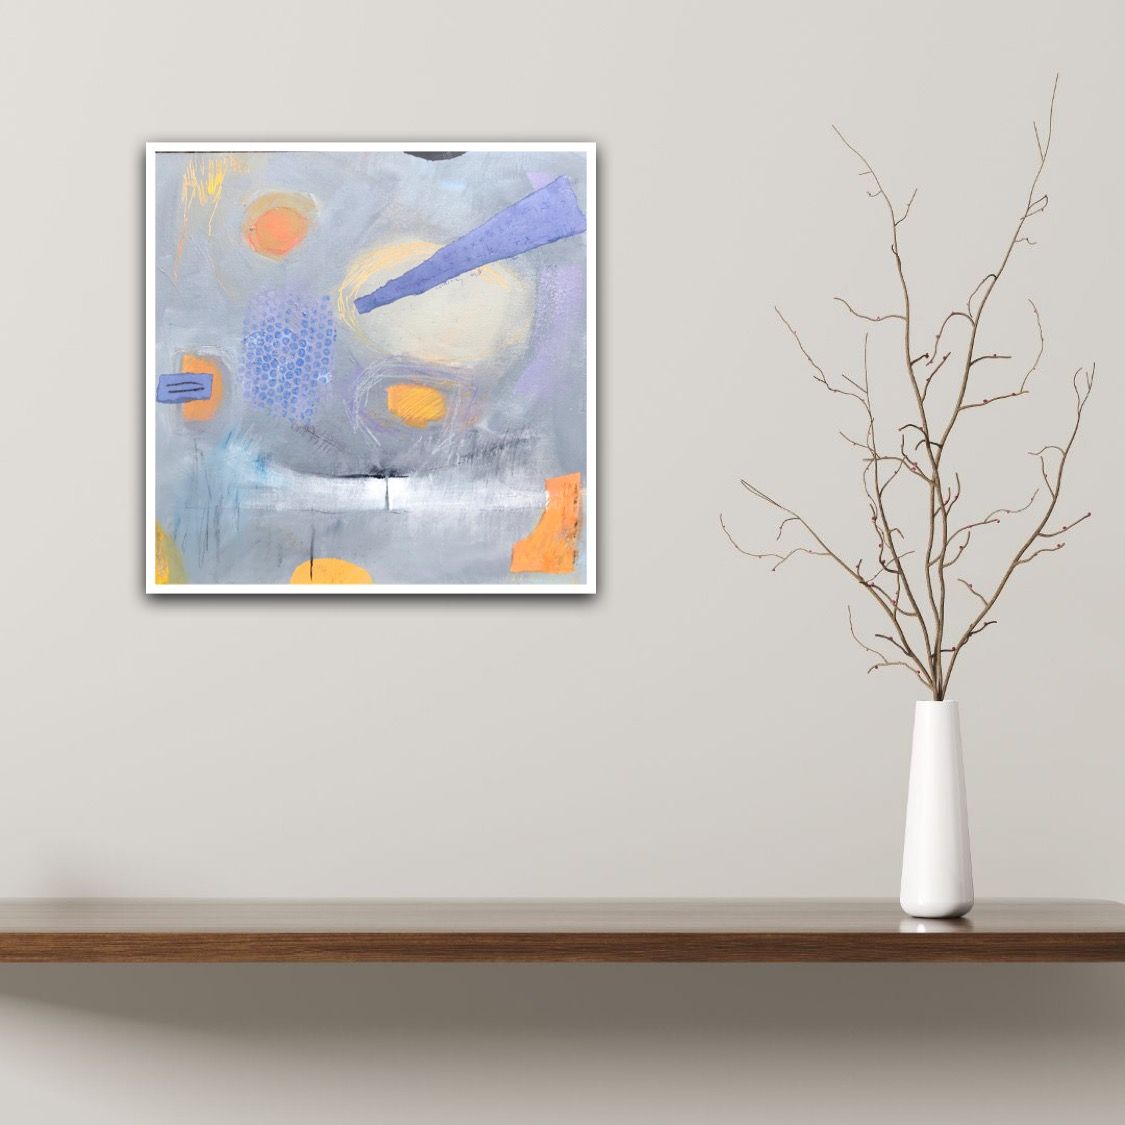 Tangerine Space by Maggie LaPorte-Banks - Secondary Image